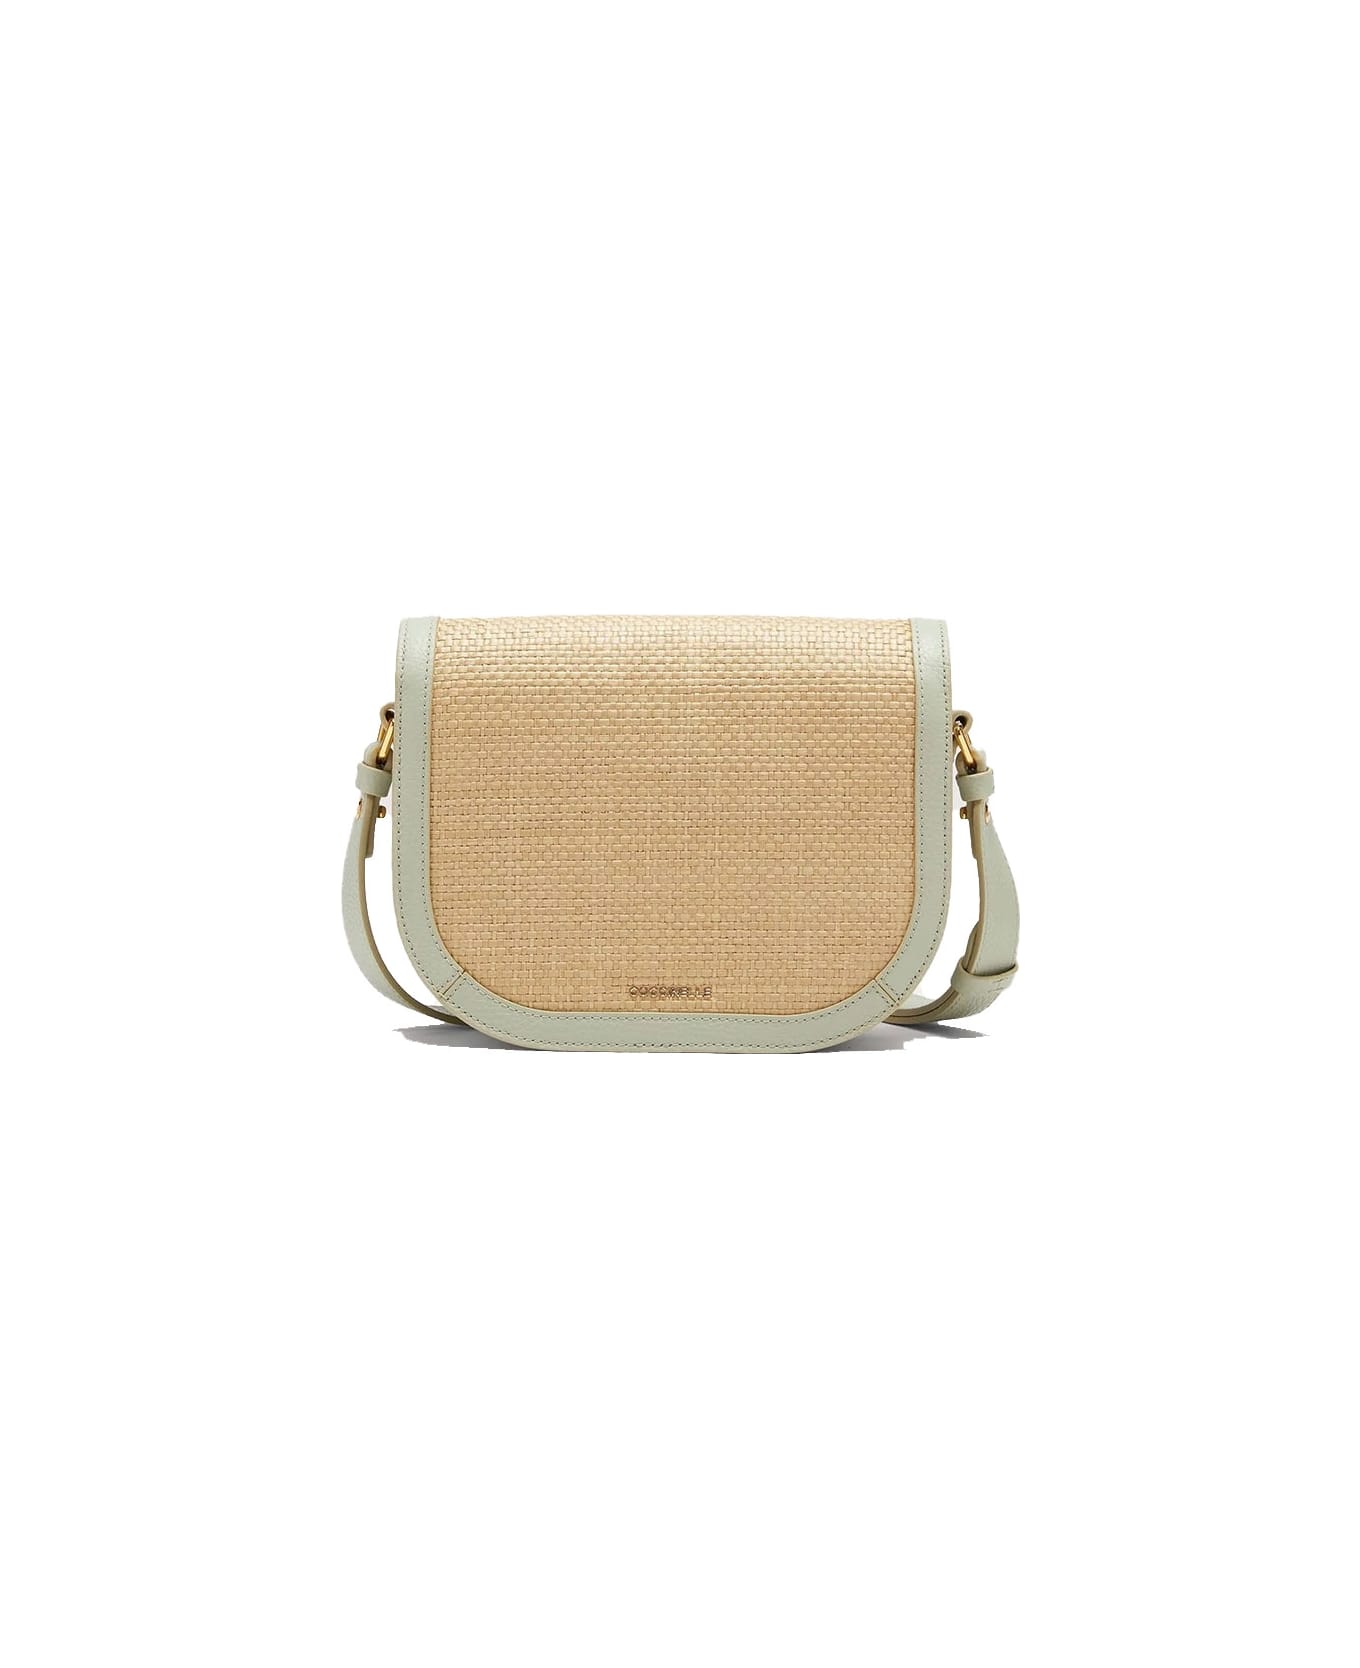 Coccinelle Dew Straw Small Bag - Natural/cela gr.